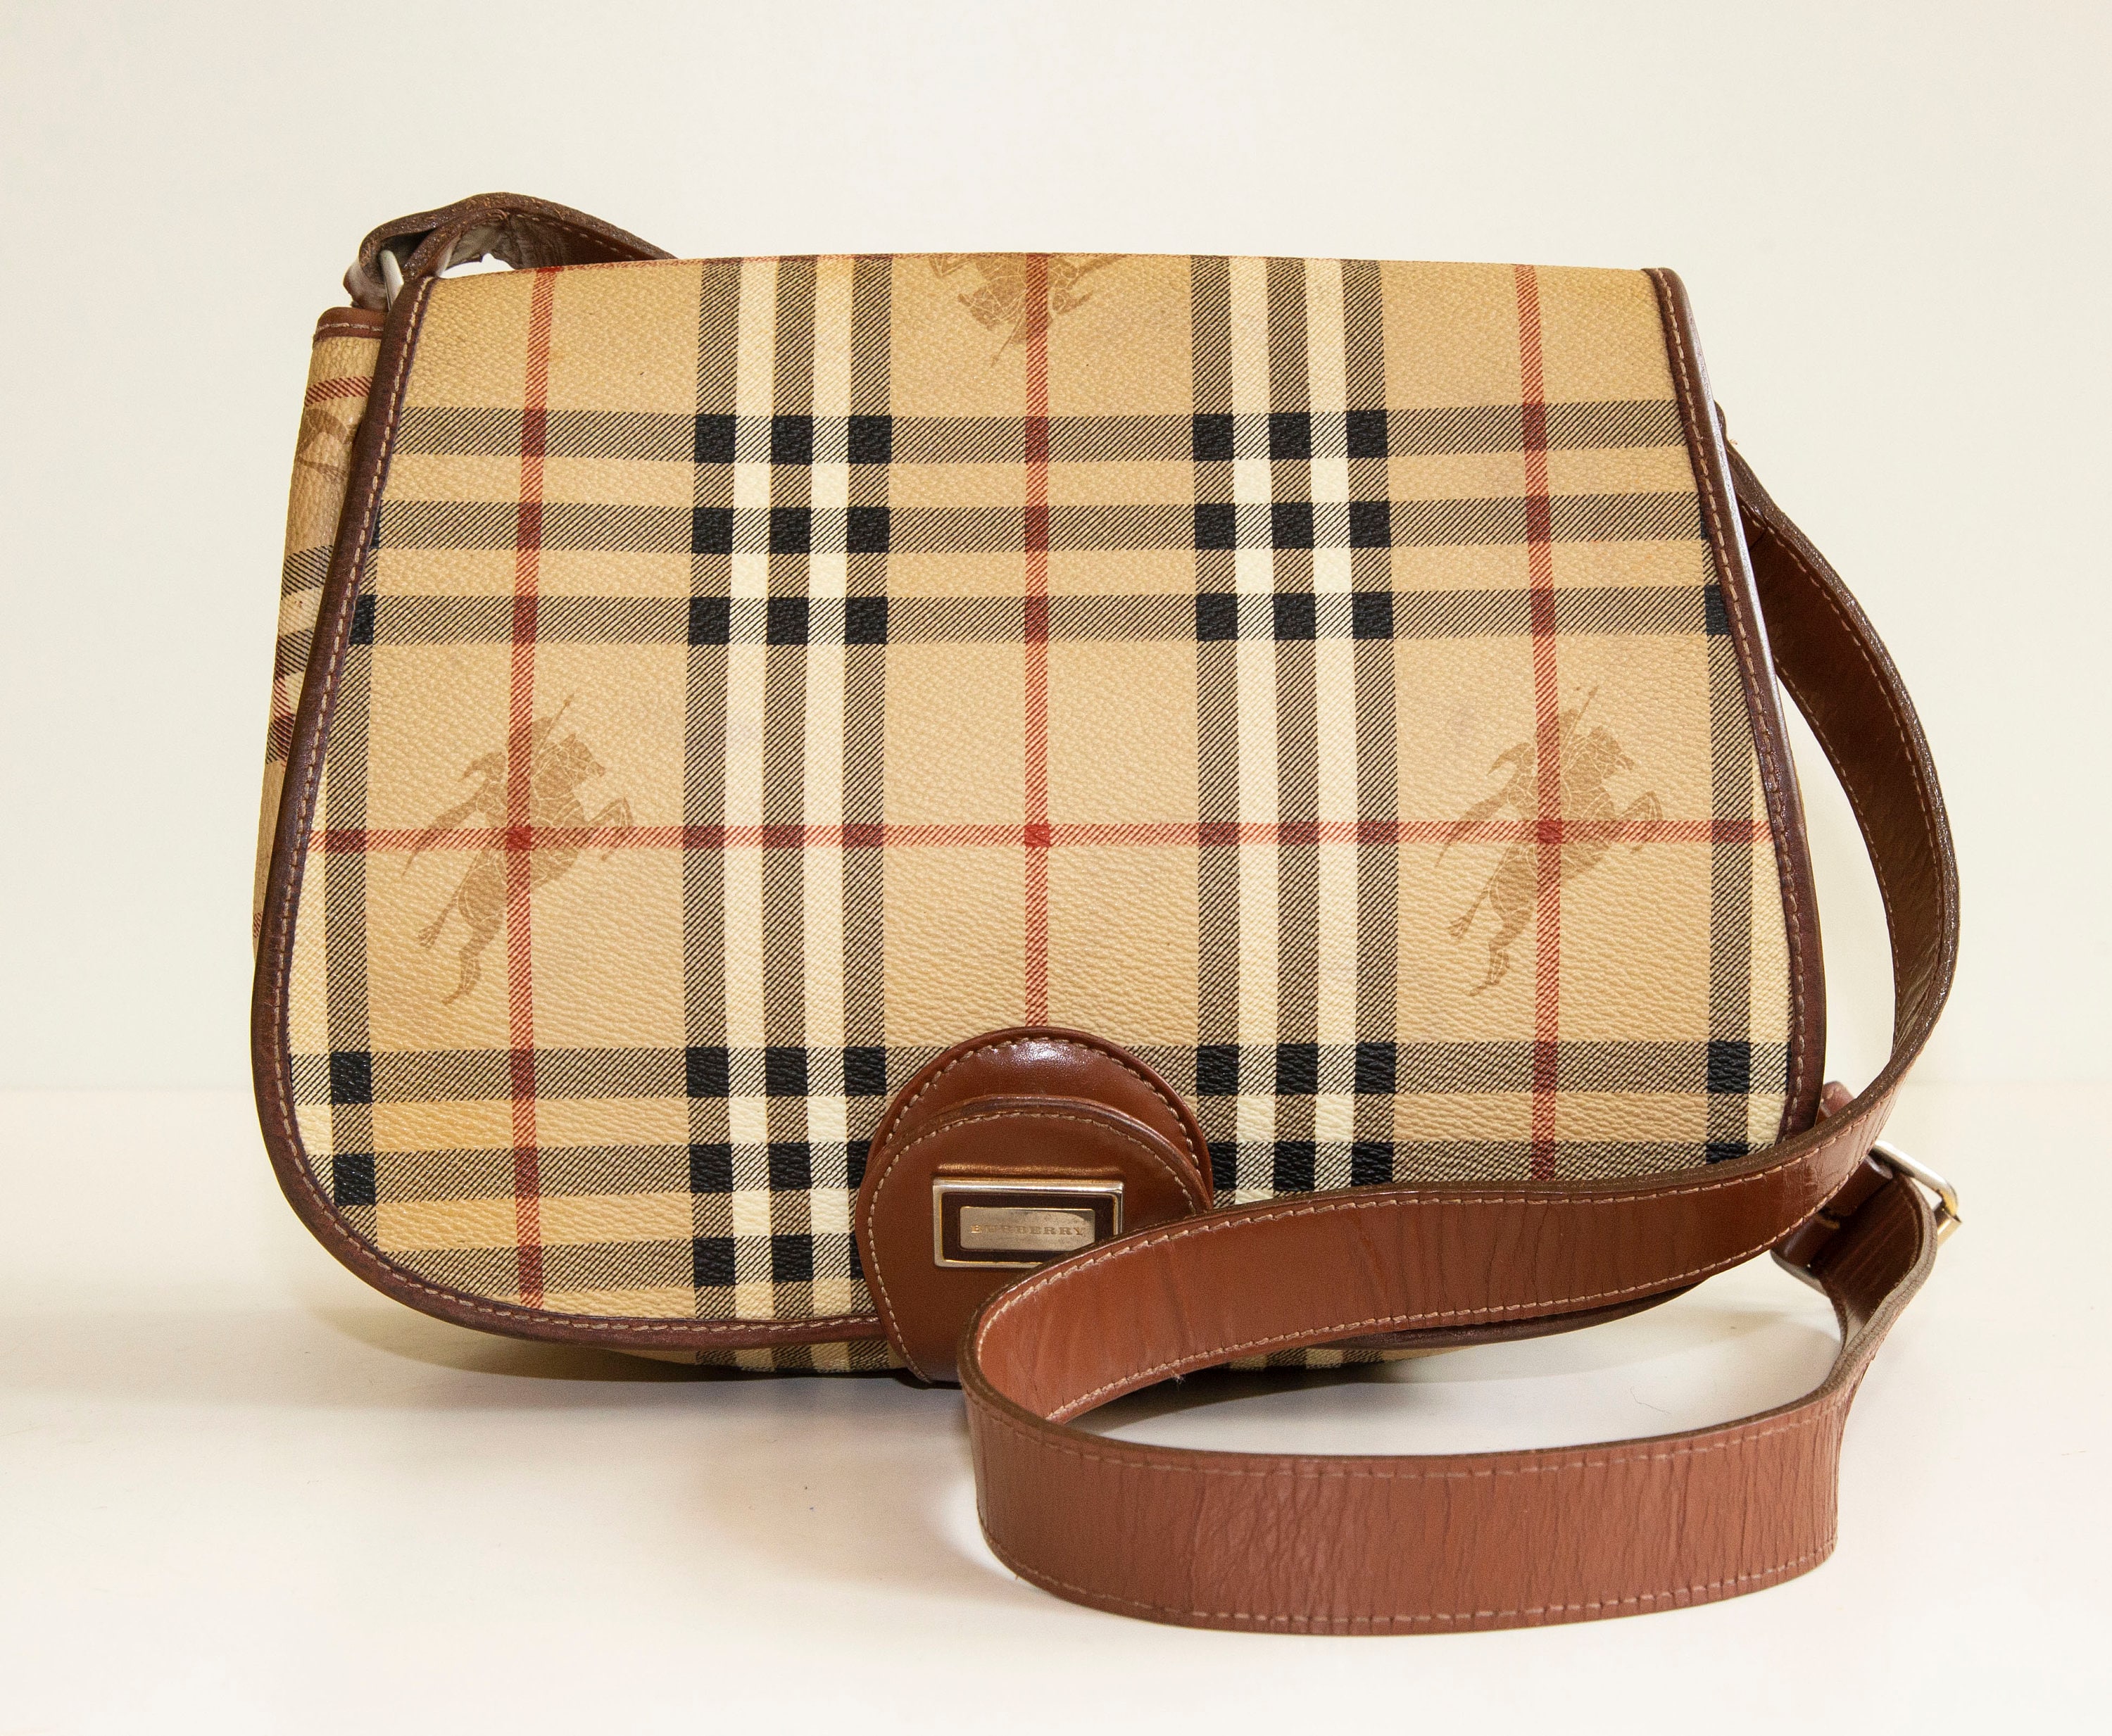 Burberry Saddle Crossbody Bag in Good Condition